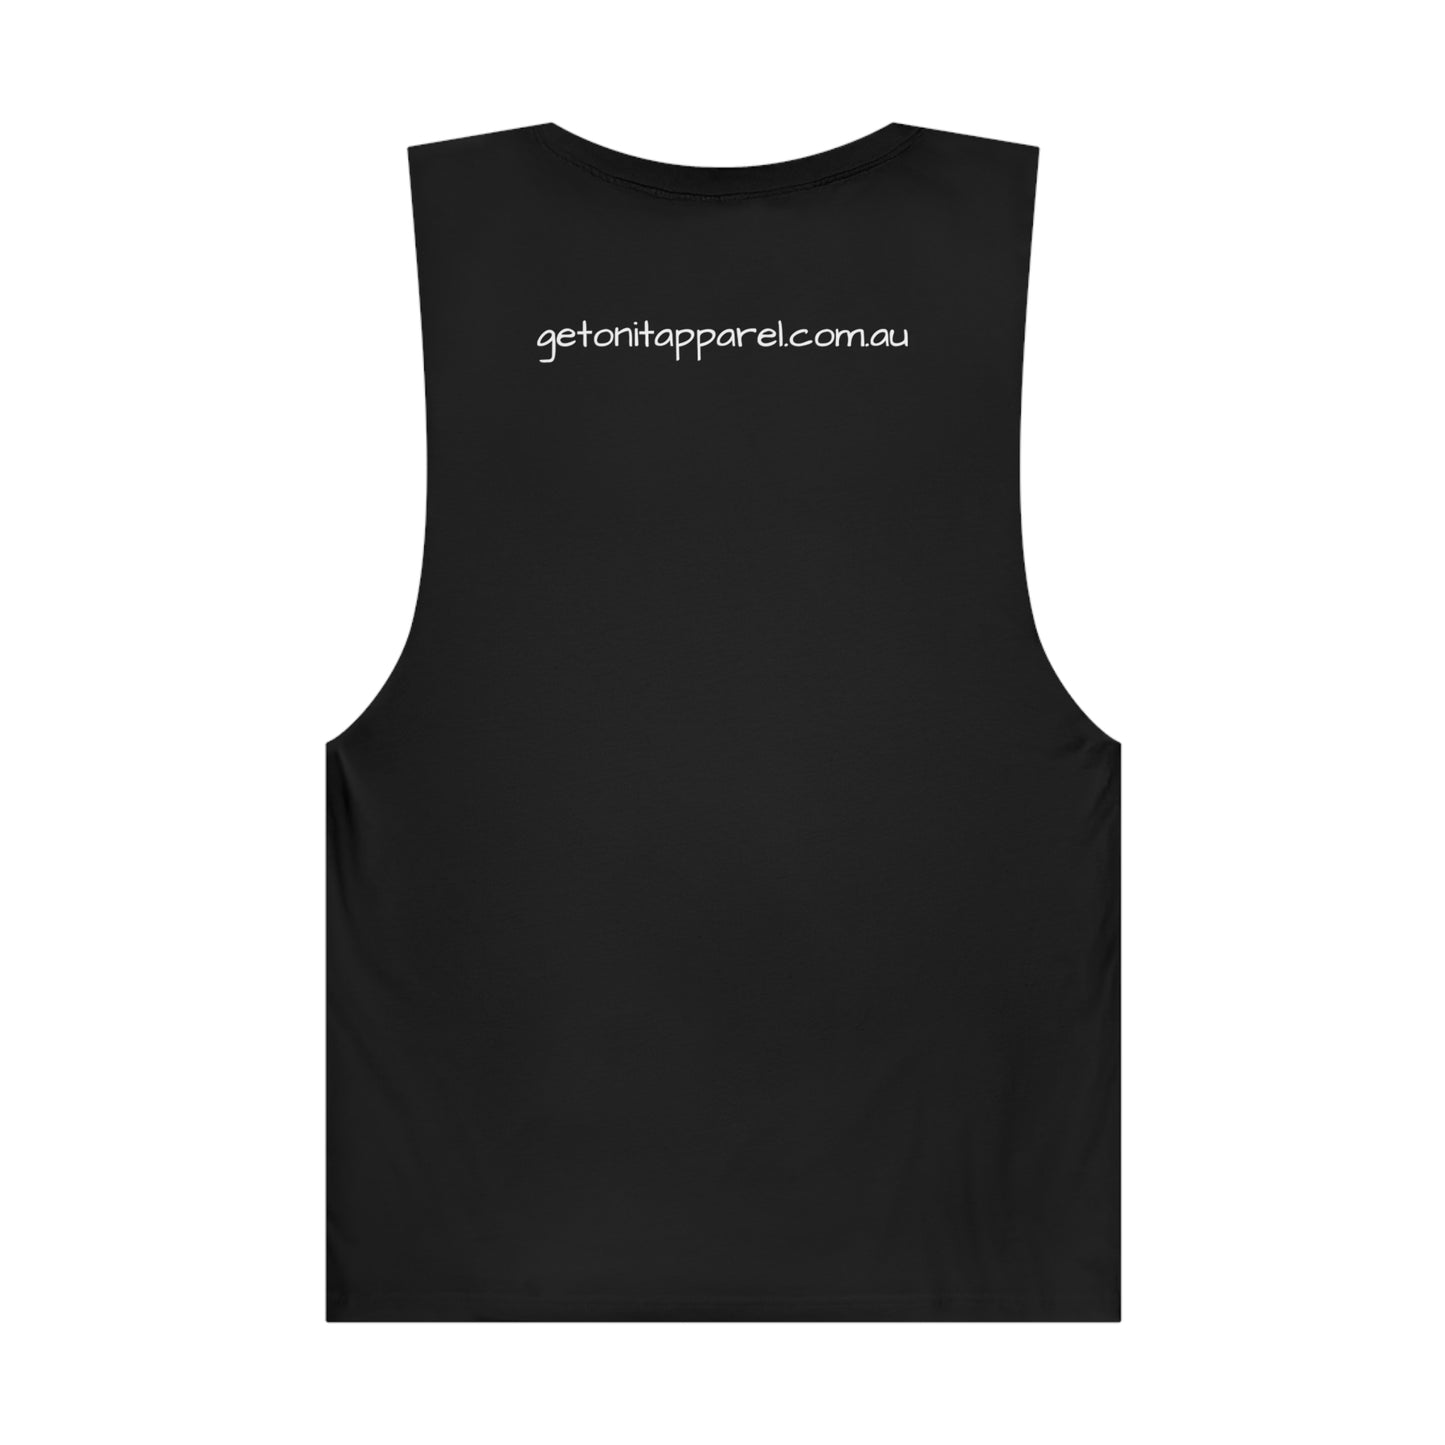 Unisex Barnard Tank - I Thought I Wanted A Career Turns Out I Wanted Paychecks To Go Fishing